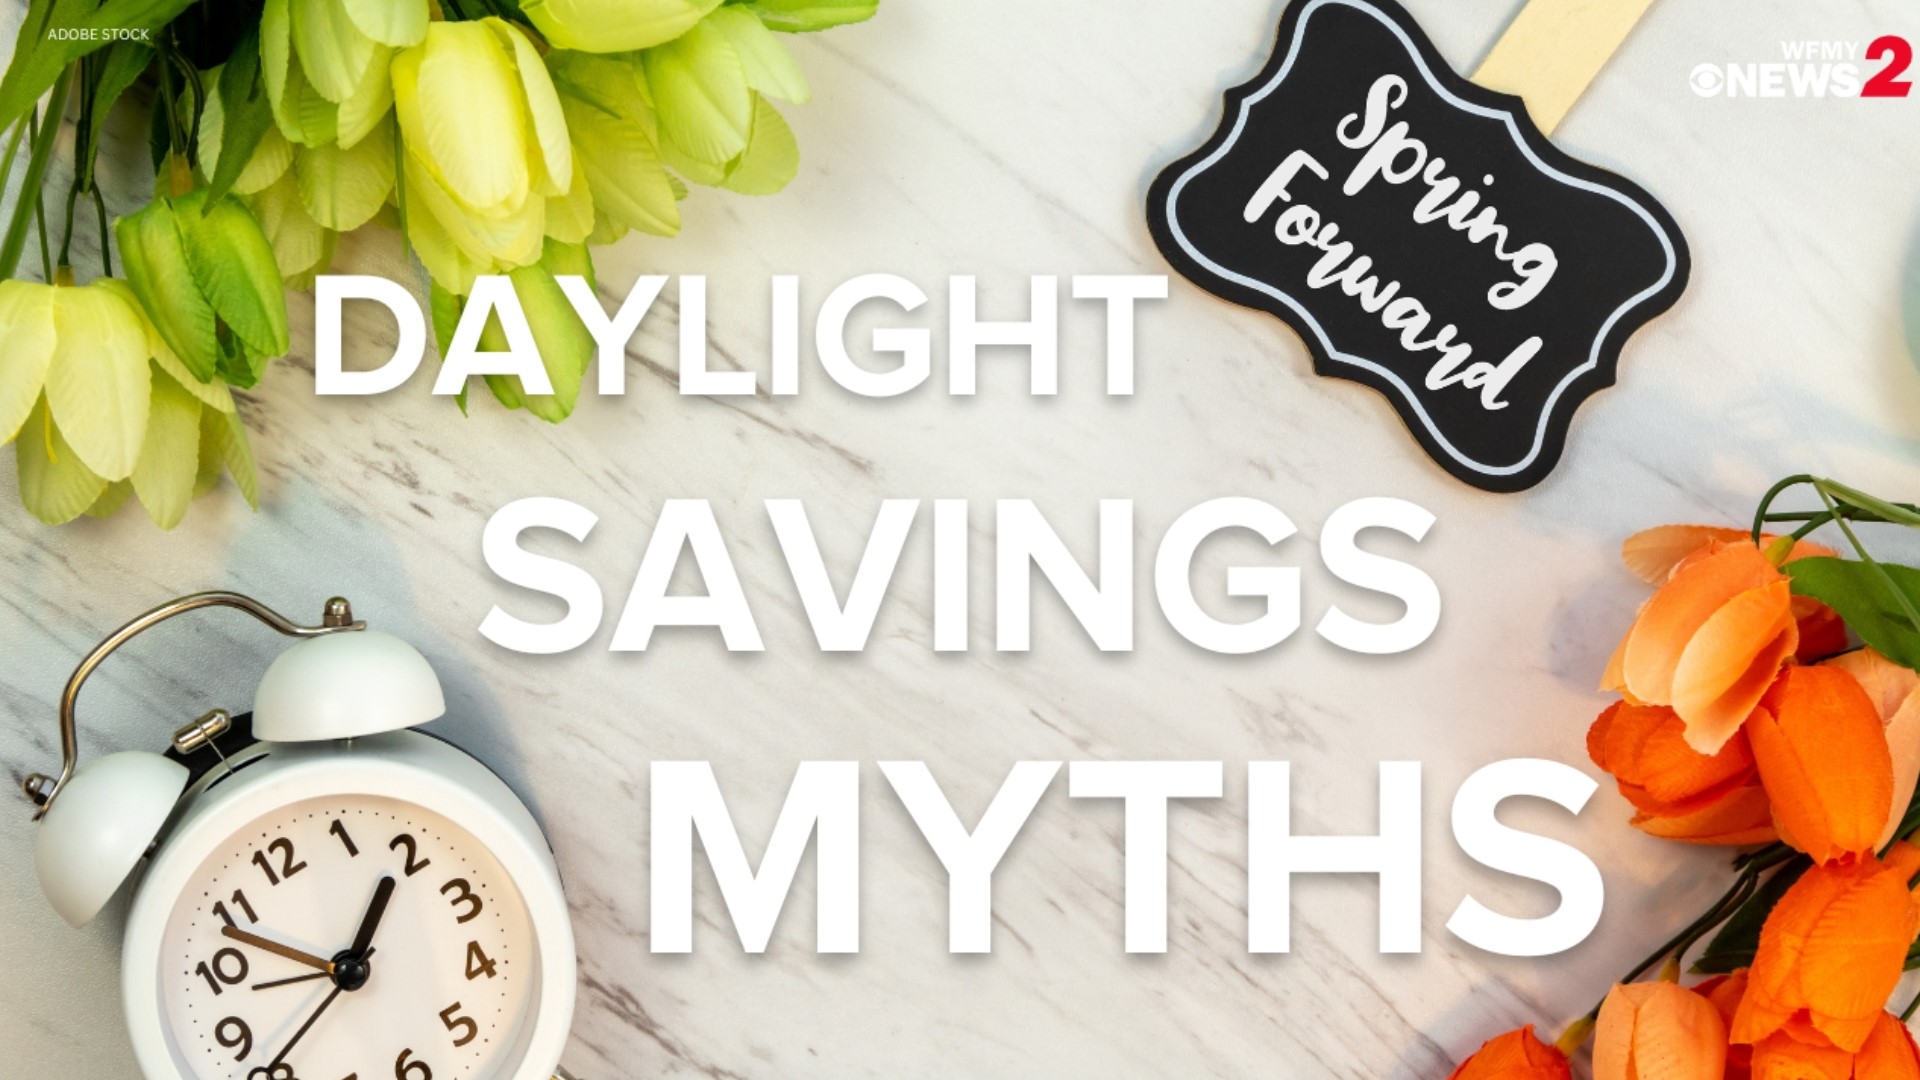 Daylight Saving Time has a lot of myths tied to it. What’s true and what’s false?